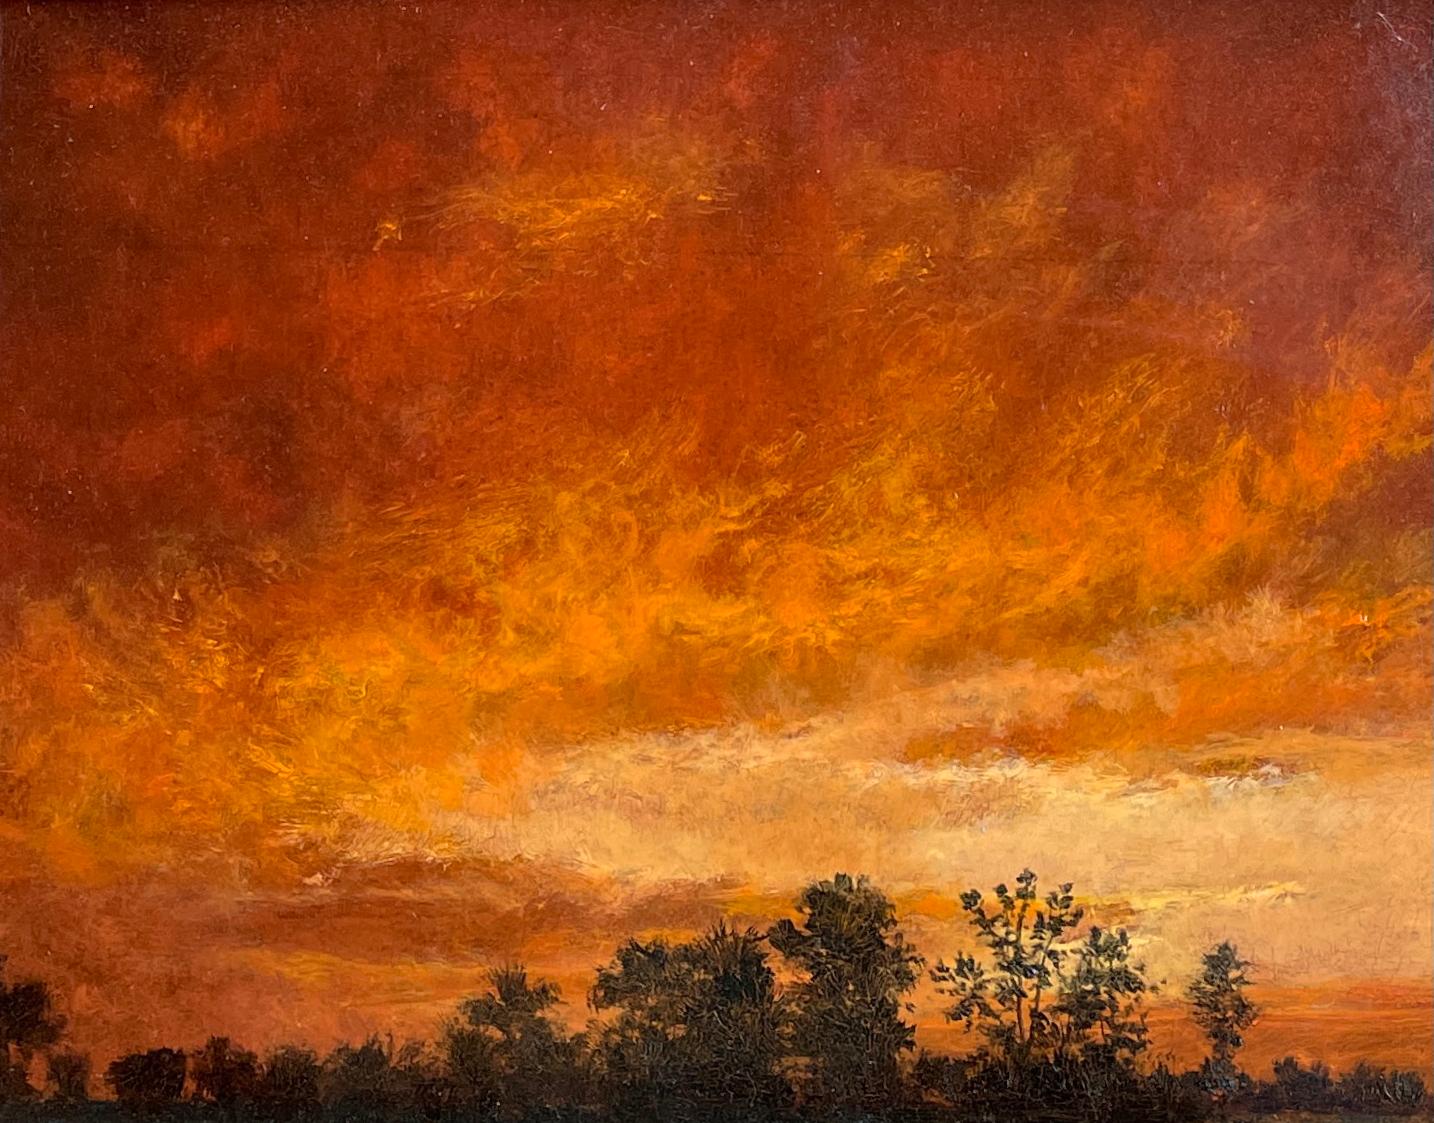 Sunset - Fiery Sky with Silhouetted Trees on the Horizon, Oil on Panel, Framed - Painting by Jeff Aeling